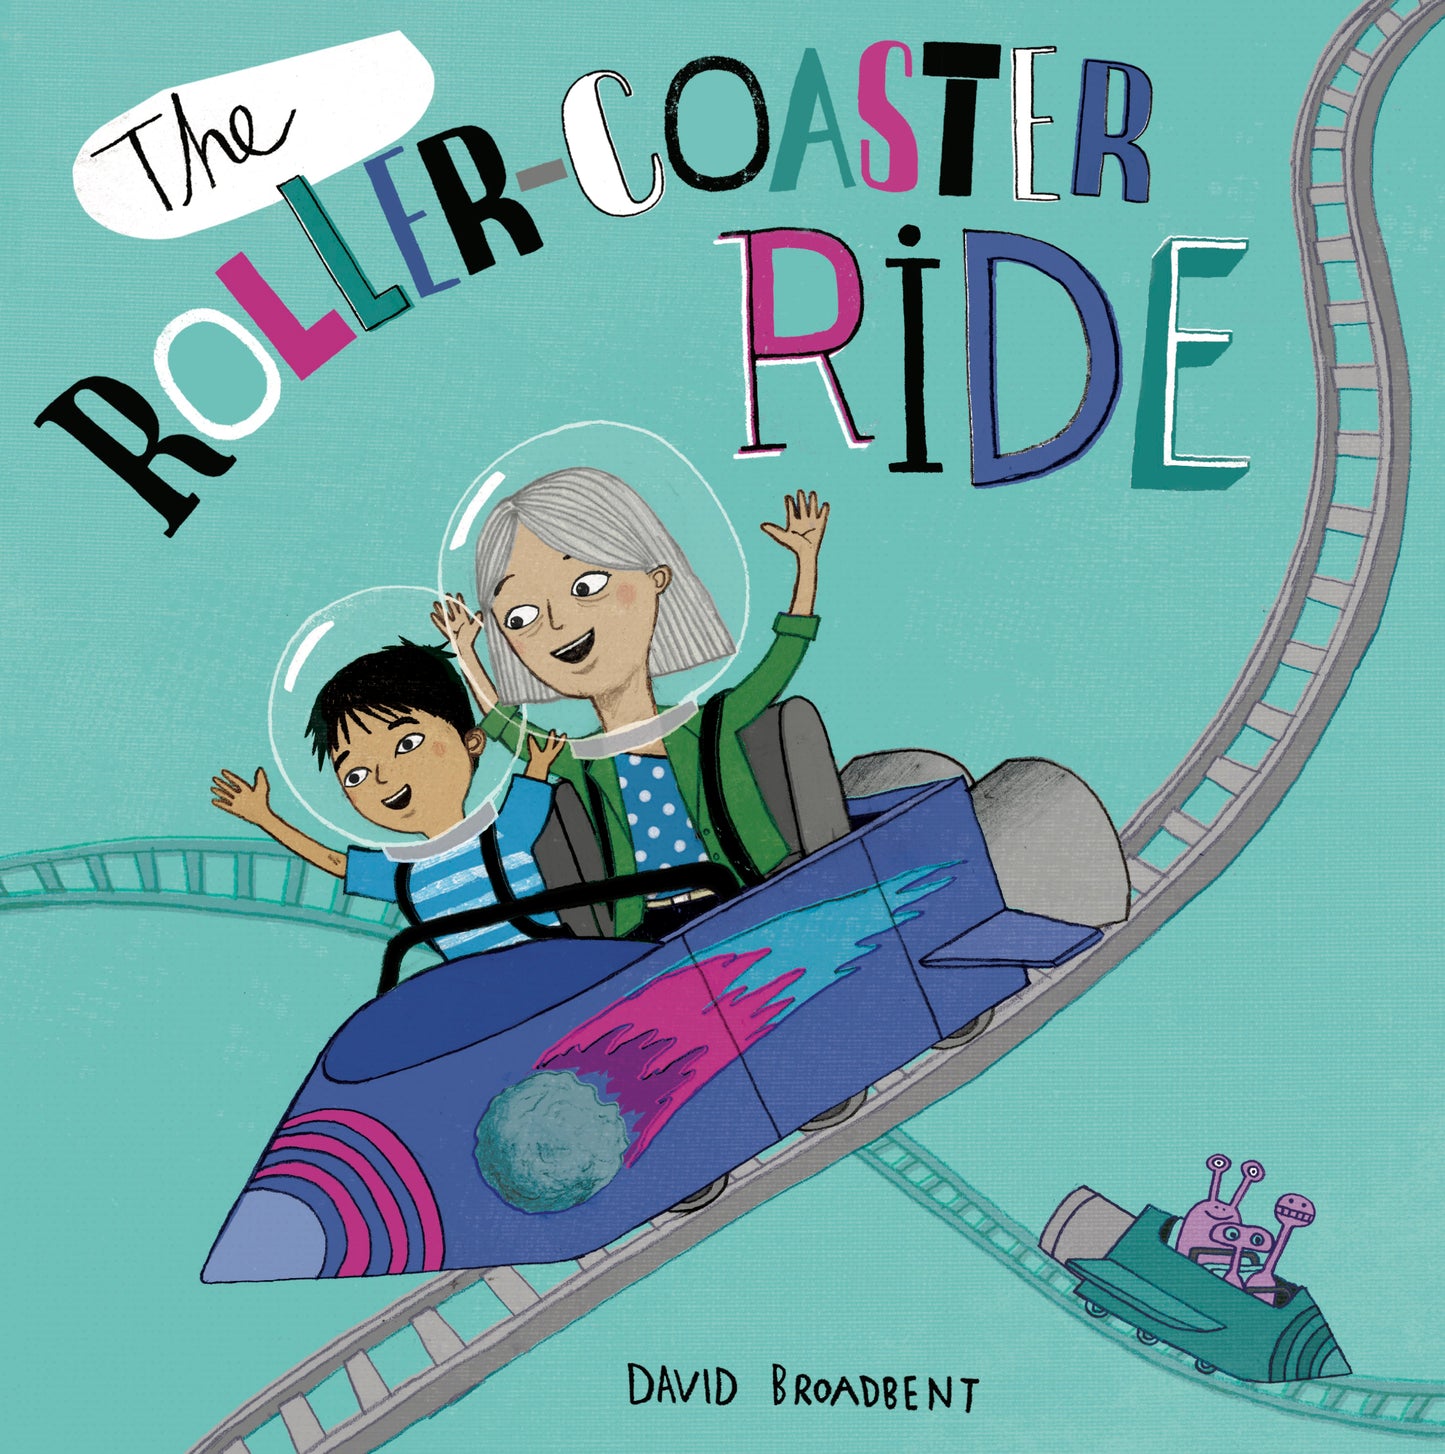 The Roller Coaster Ride (Hardcover Edition)